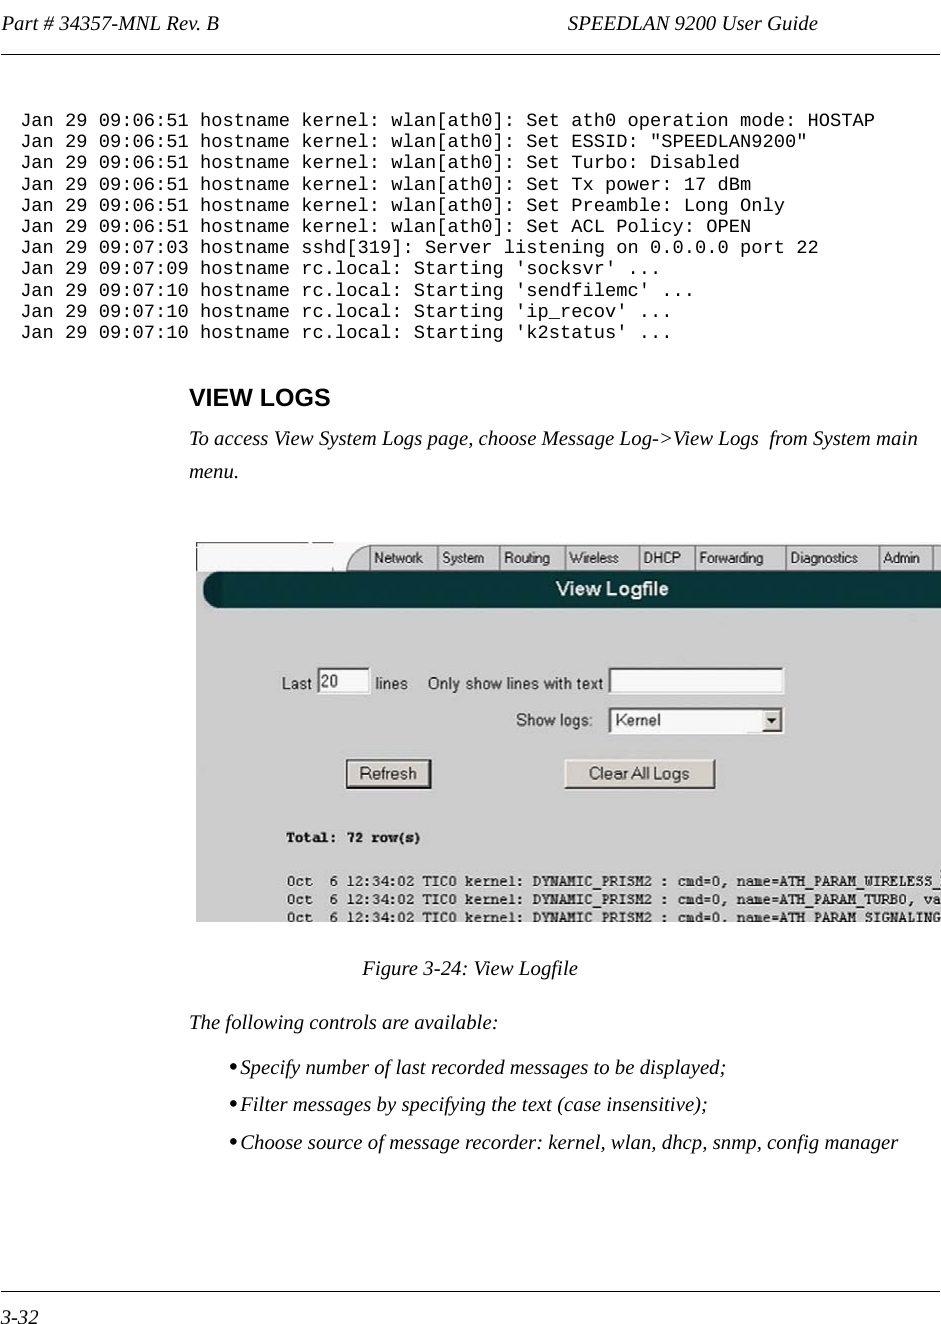 Part # 34357-MNL Rev. B                                                                   SPEEDLAN 9200 User Guide 3-32VIEW LOGSTo access View System Logs page, choose Message Log-&gt;View Logs  from System main menu.Figure 3-24: View LogfileThe following controls are available:•Specify number of last recorded messages to be displayed;•Filter messages by specifying the text (case insensitive);•Choose source of message recorder: kernel, wlan, dhcp, snmp, config manager Jan 29 09:06:51 hostname kernel: wlan[ath0]: Set ath0 operation mode: HOSTAP Jan 29 09:06:51 hostname kernel: wlan[ath0]: Set ESSID: &quot;SPEEDLAN9200&quot; Jan 29 09:06:51 hostname kernel: wlan[ath0]: Set Turbo: Disabled Jan 29 09:06:51 hostname kernel: wlan[ath0]: Set Tx power: 17 dBm Jan 29 09:06:51 hostname kernel: wlan[ath0]: Set Preamble: Long Only Jan 29 09:06:51 hostname kernel: wlan[ath0]: Set ACL Policy: OPEN Jan 29 09:07:03 hostname sshd[319]: Server listening on 0.0.0.0 port 22 Jan 29 09:07:09 hostname rc.local: Starting &apos;socksvr&apos; ... Jan 29 09:07:10 hostname rc.local: Starting &apos;sendfilemc&apos; ... Jan 29 09:07:10 hostname rc.local: Starting &apos;ip_recov&apos; ... Jan 29 09:07:10 hostname rc.local: Starting &apos;k2status&apos; ...Log OffConfig Summary